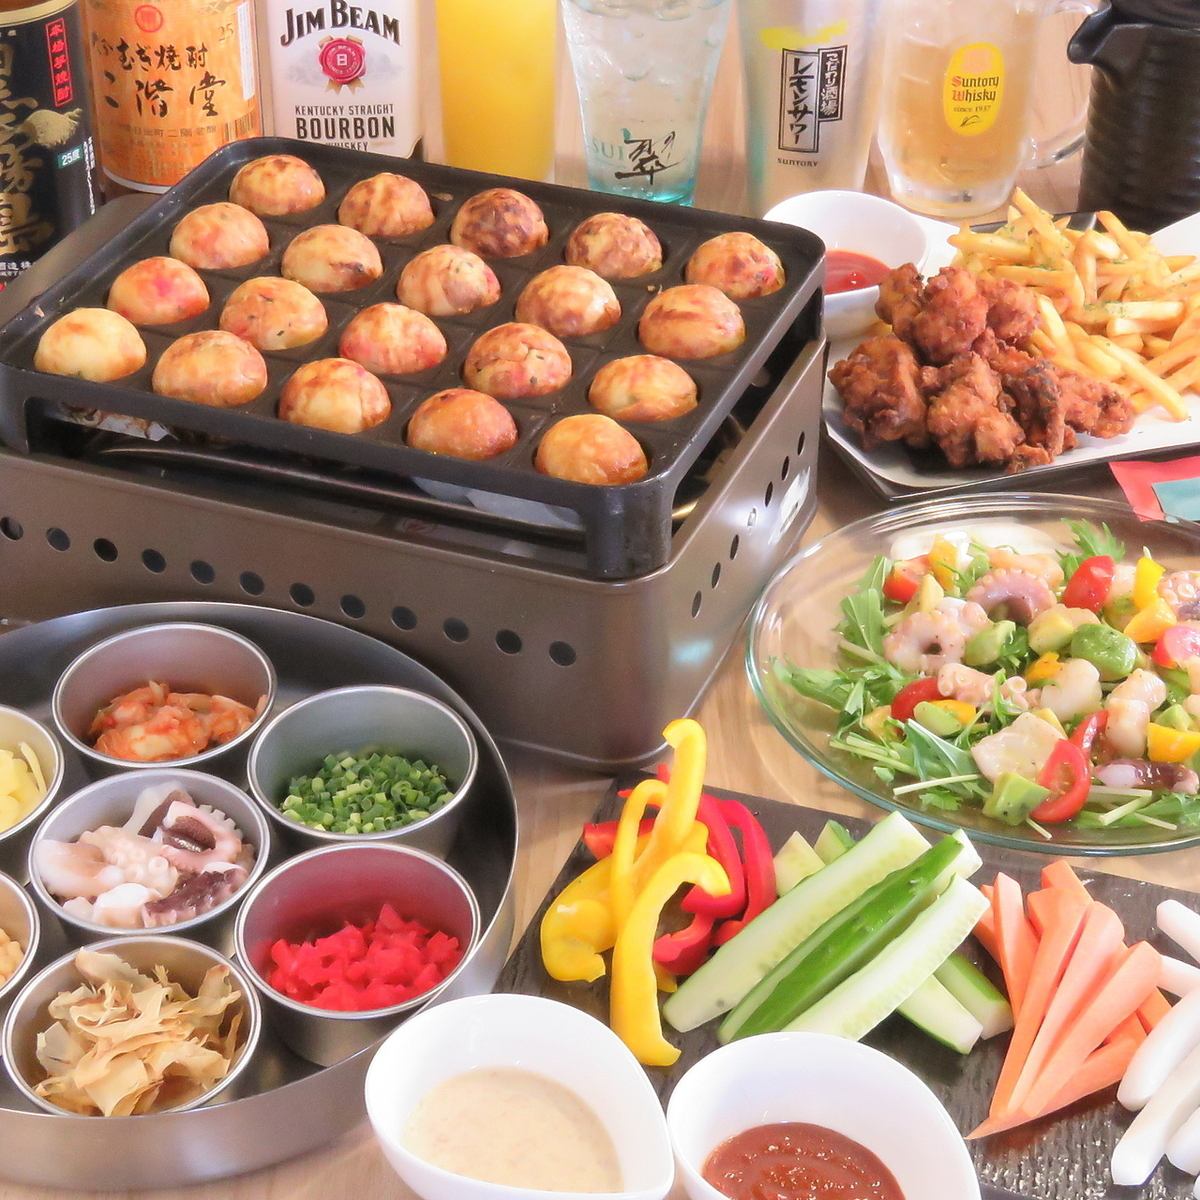 All-you-can-eat takoyaki & all-you-can-drink + 4 dishes for 120 minutes for 3,500 yen!